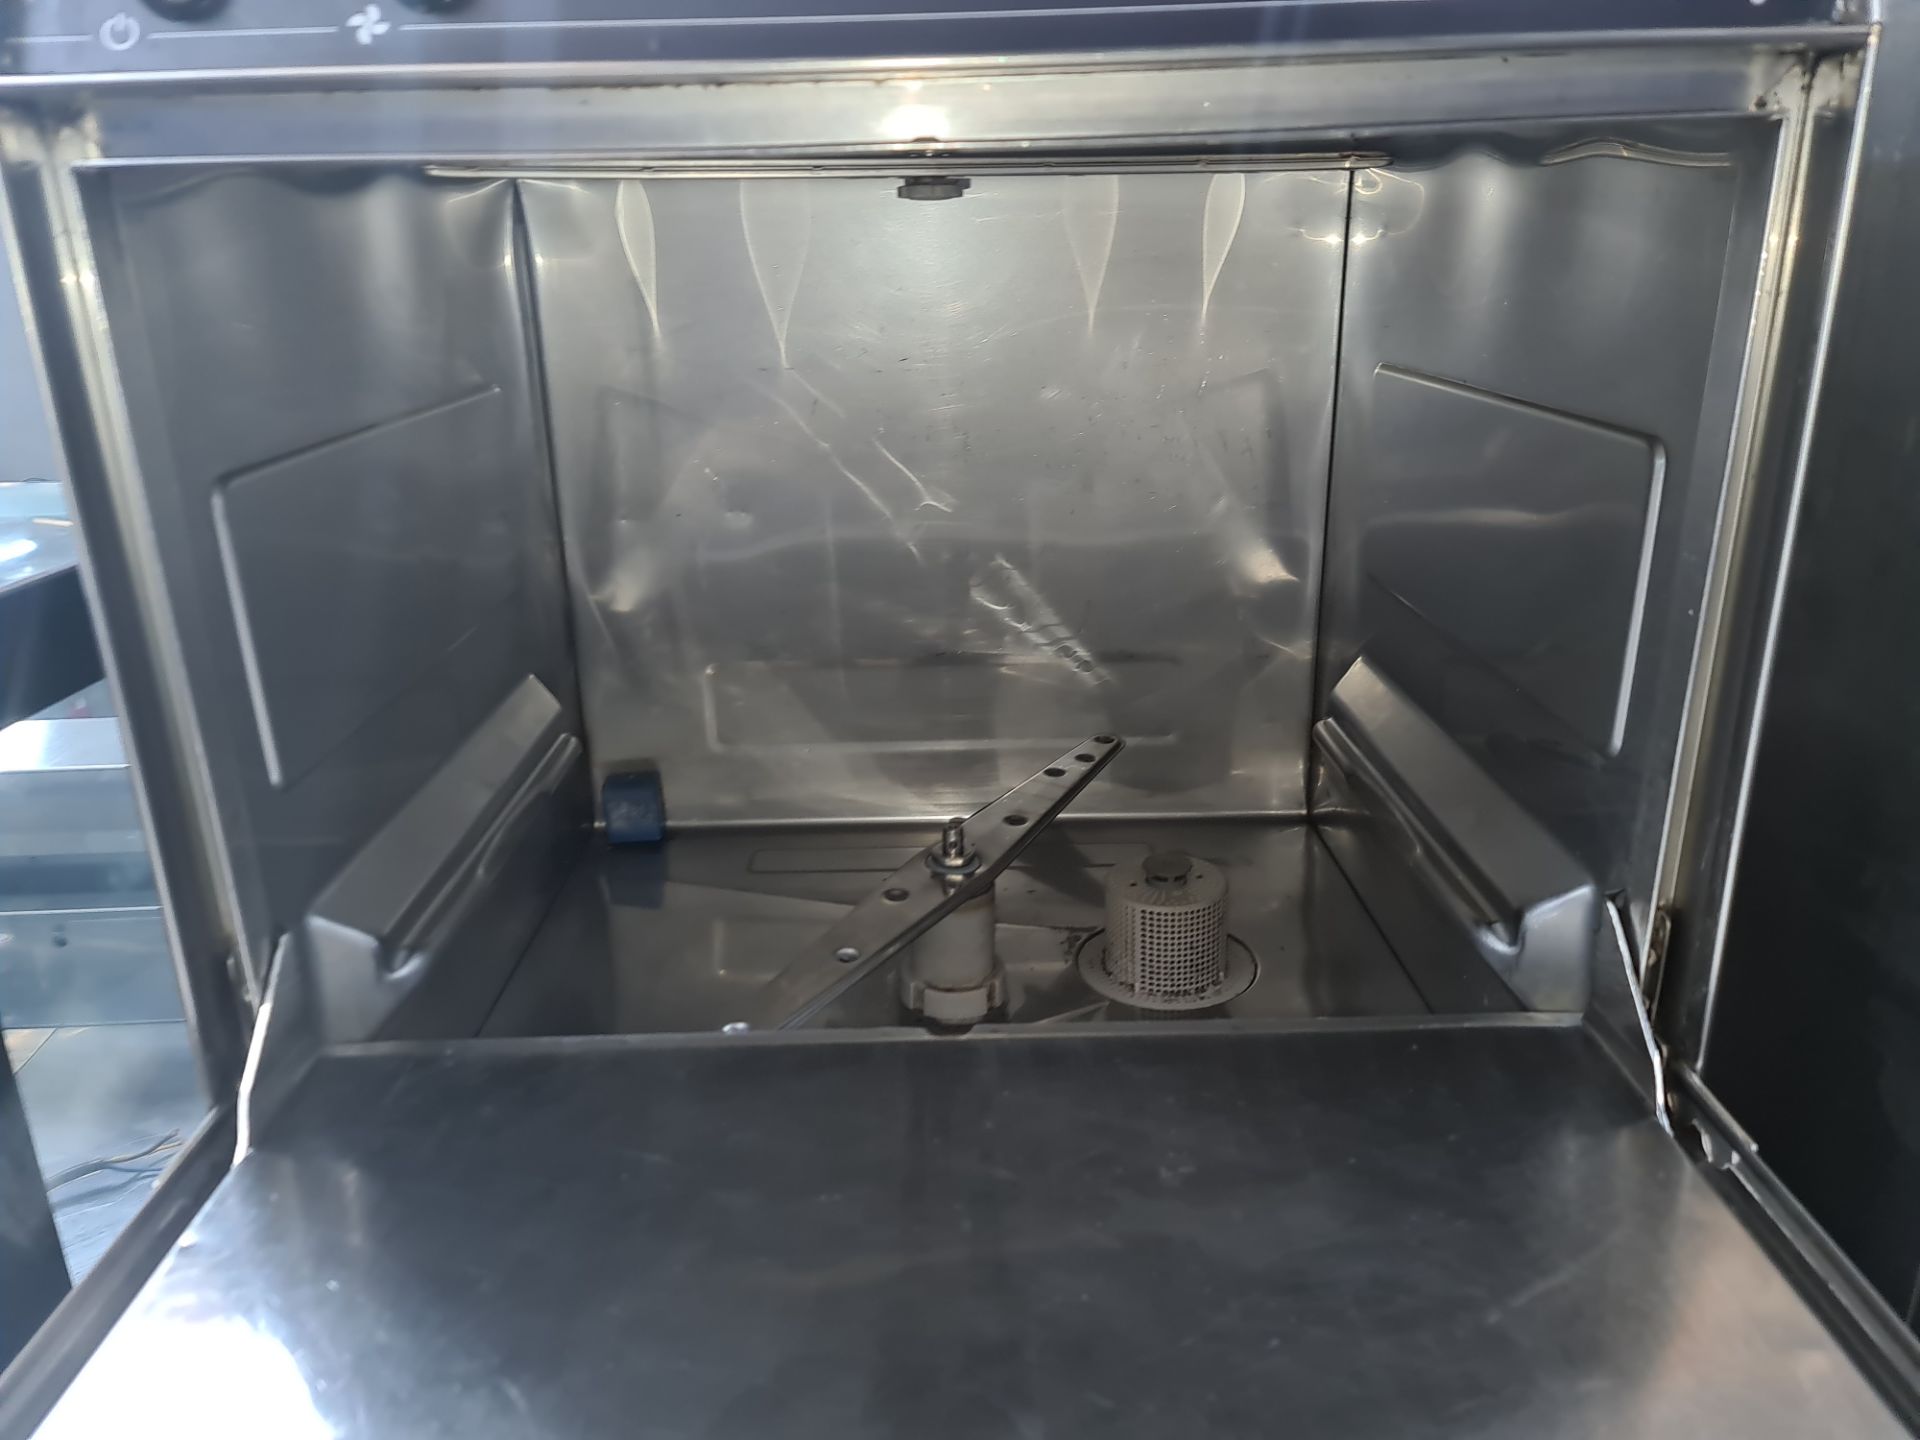 DC Series stainless steel glasswasher/dishwasher NB. This lot does not include the stand on which it - Image 2 of 4